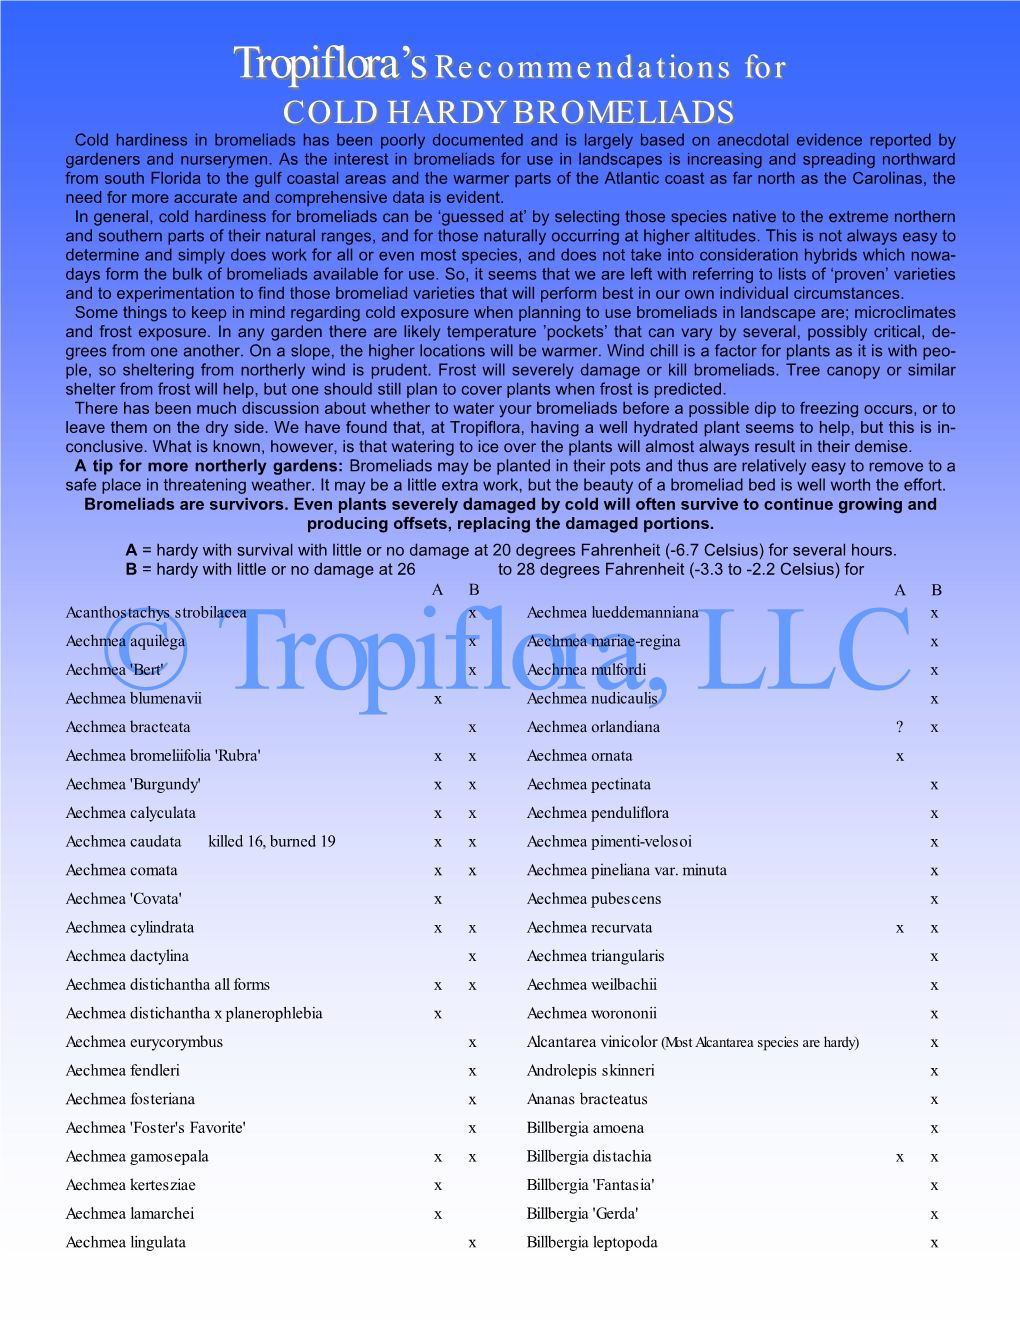 Tropiflora's Recommendations for COLD HARDY BROMELIADS